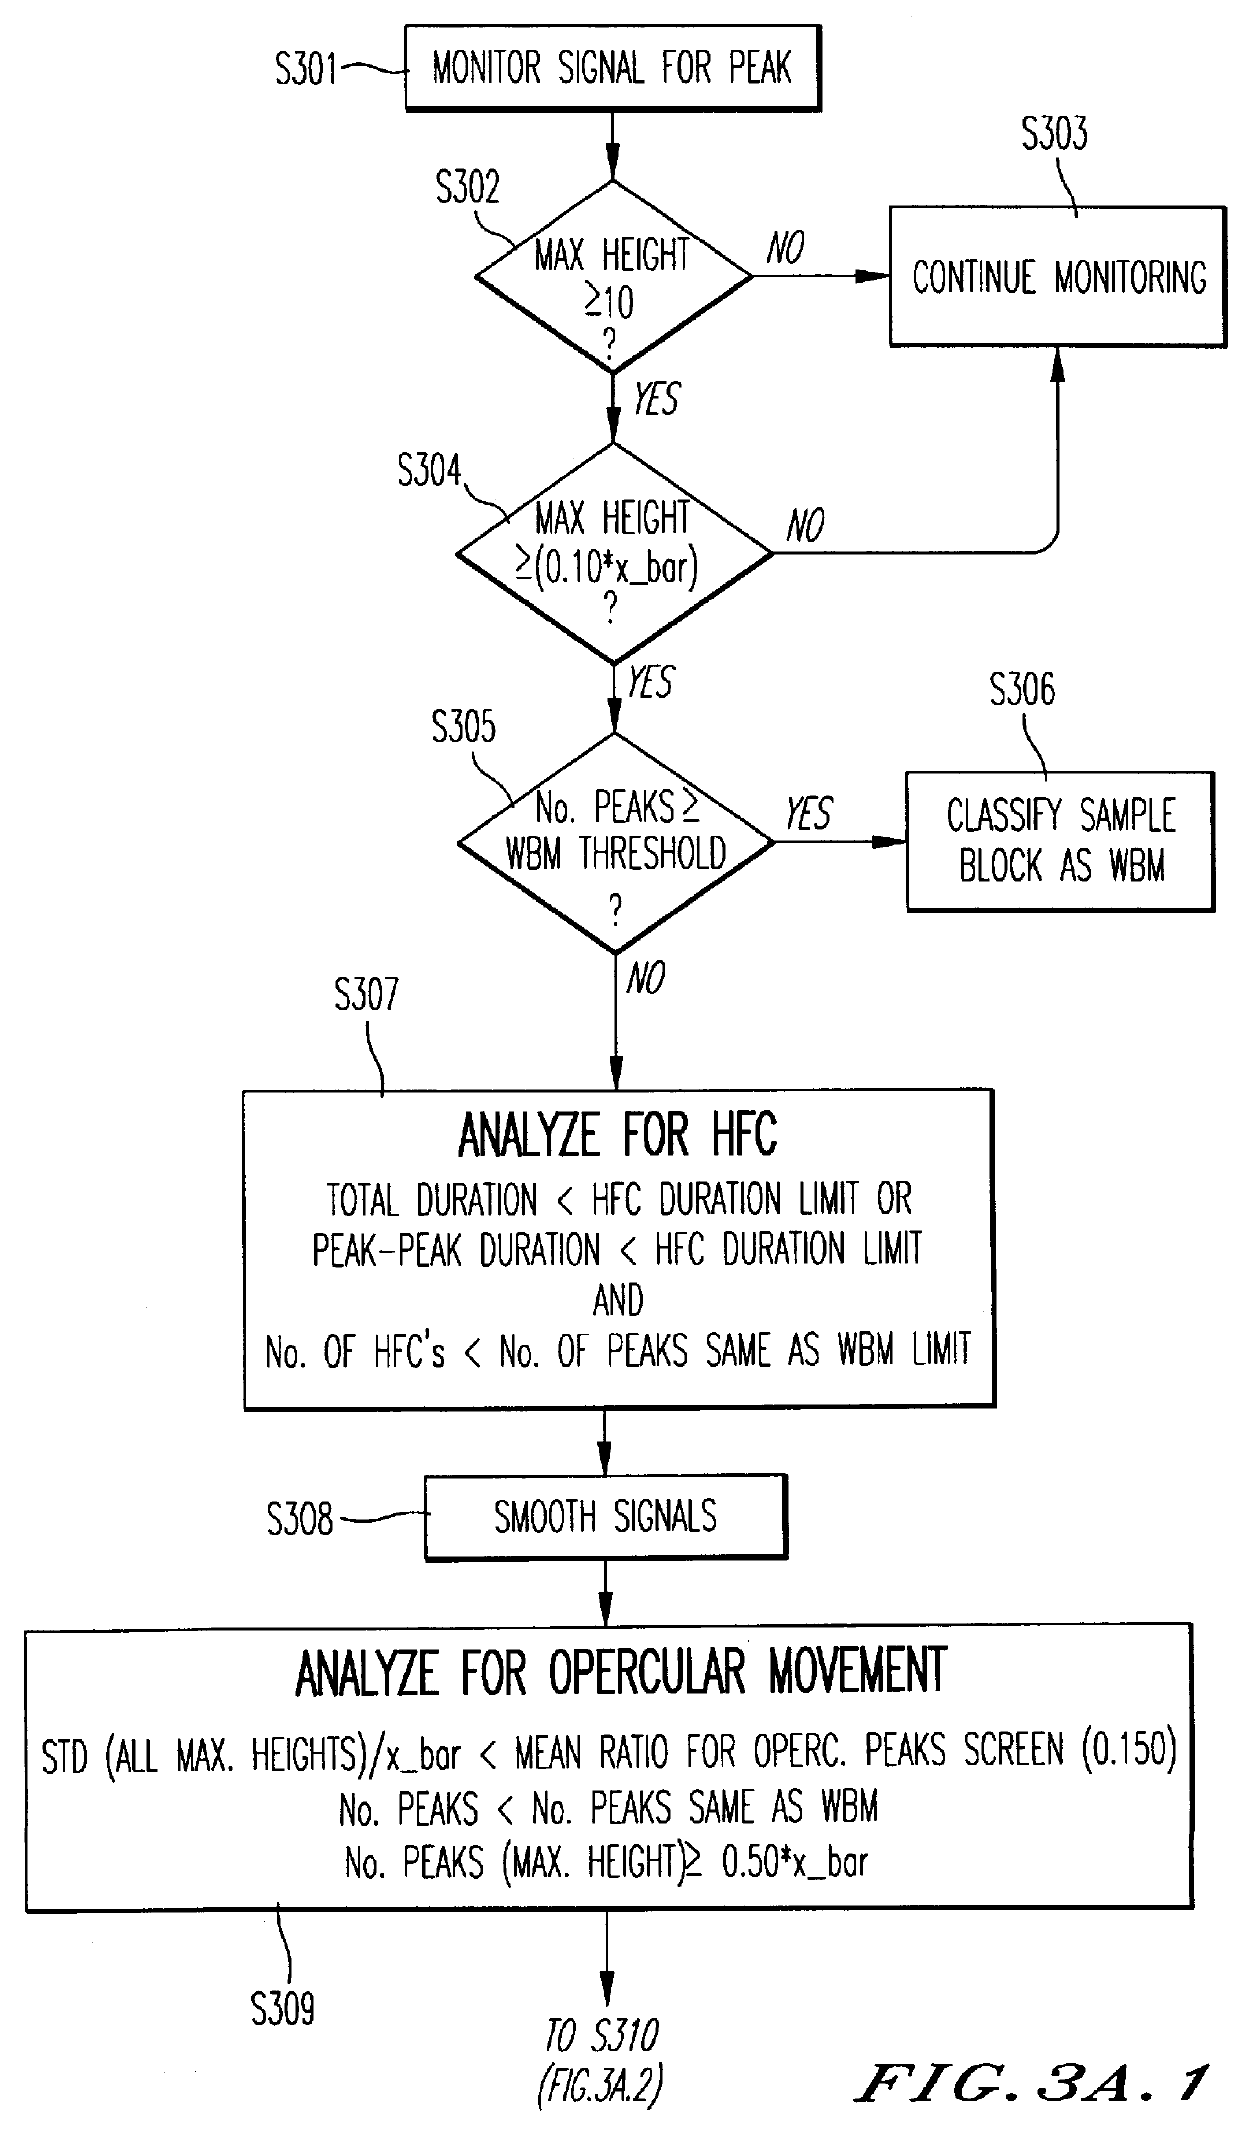 Apparatus and method for automated biomonitoring of water quality